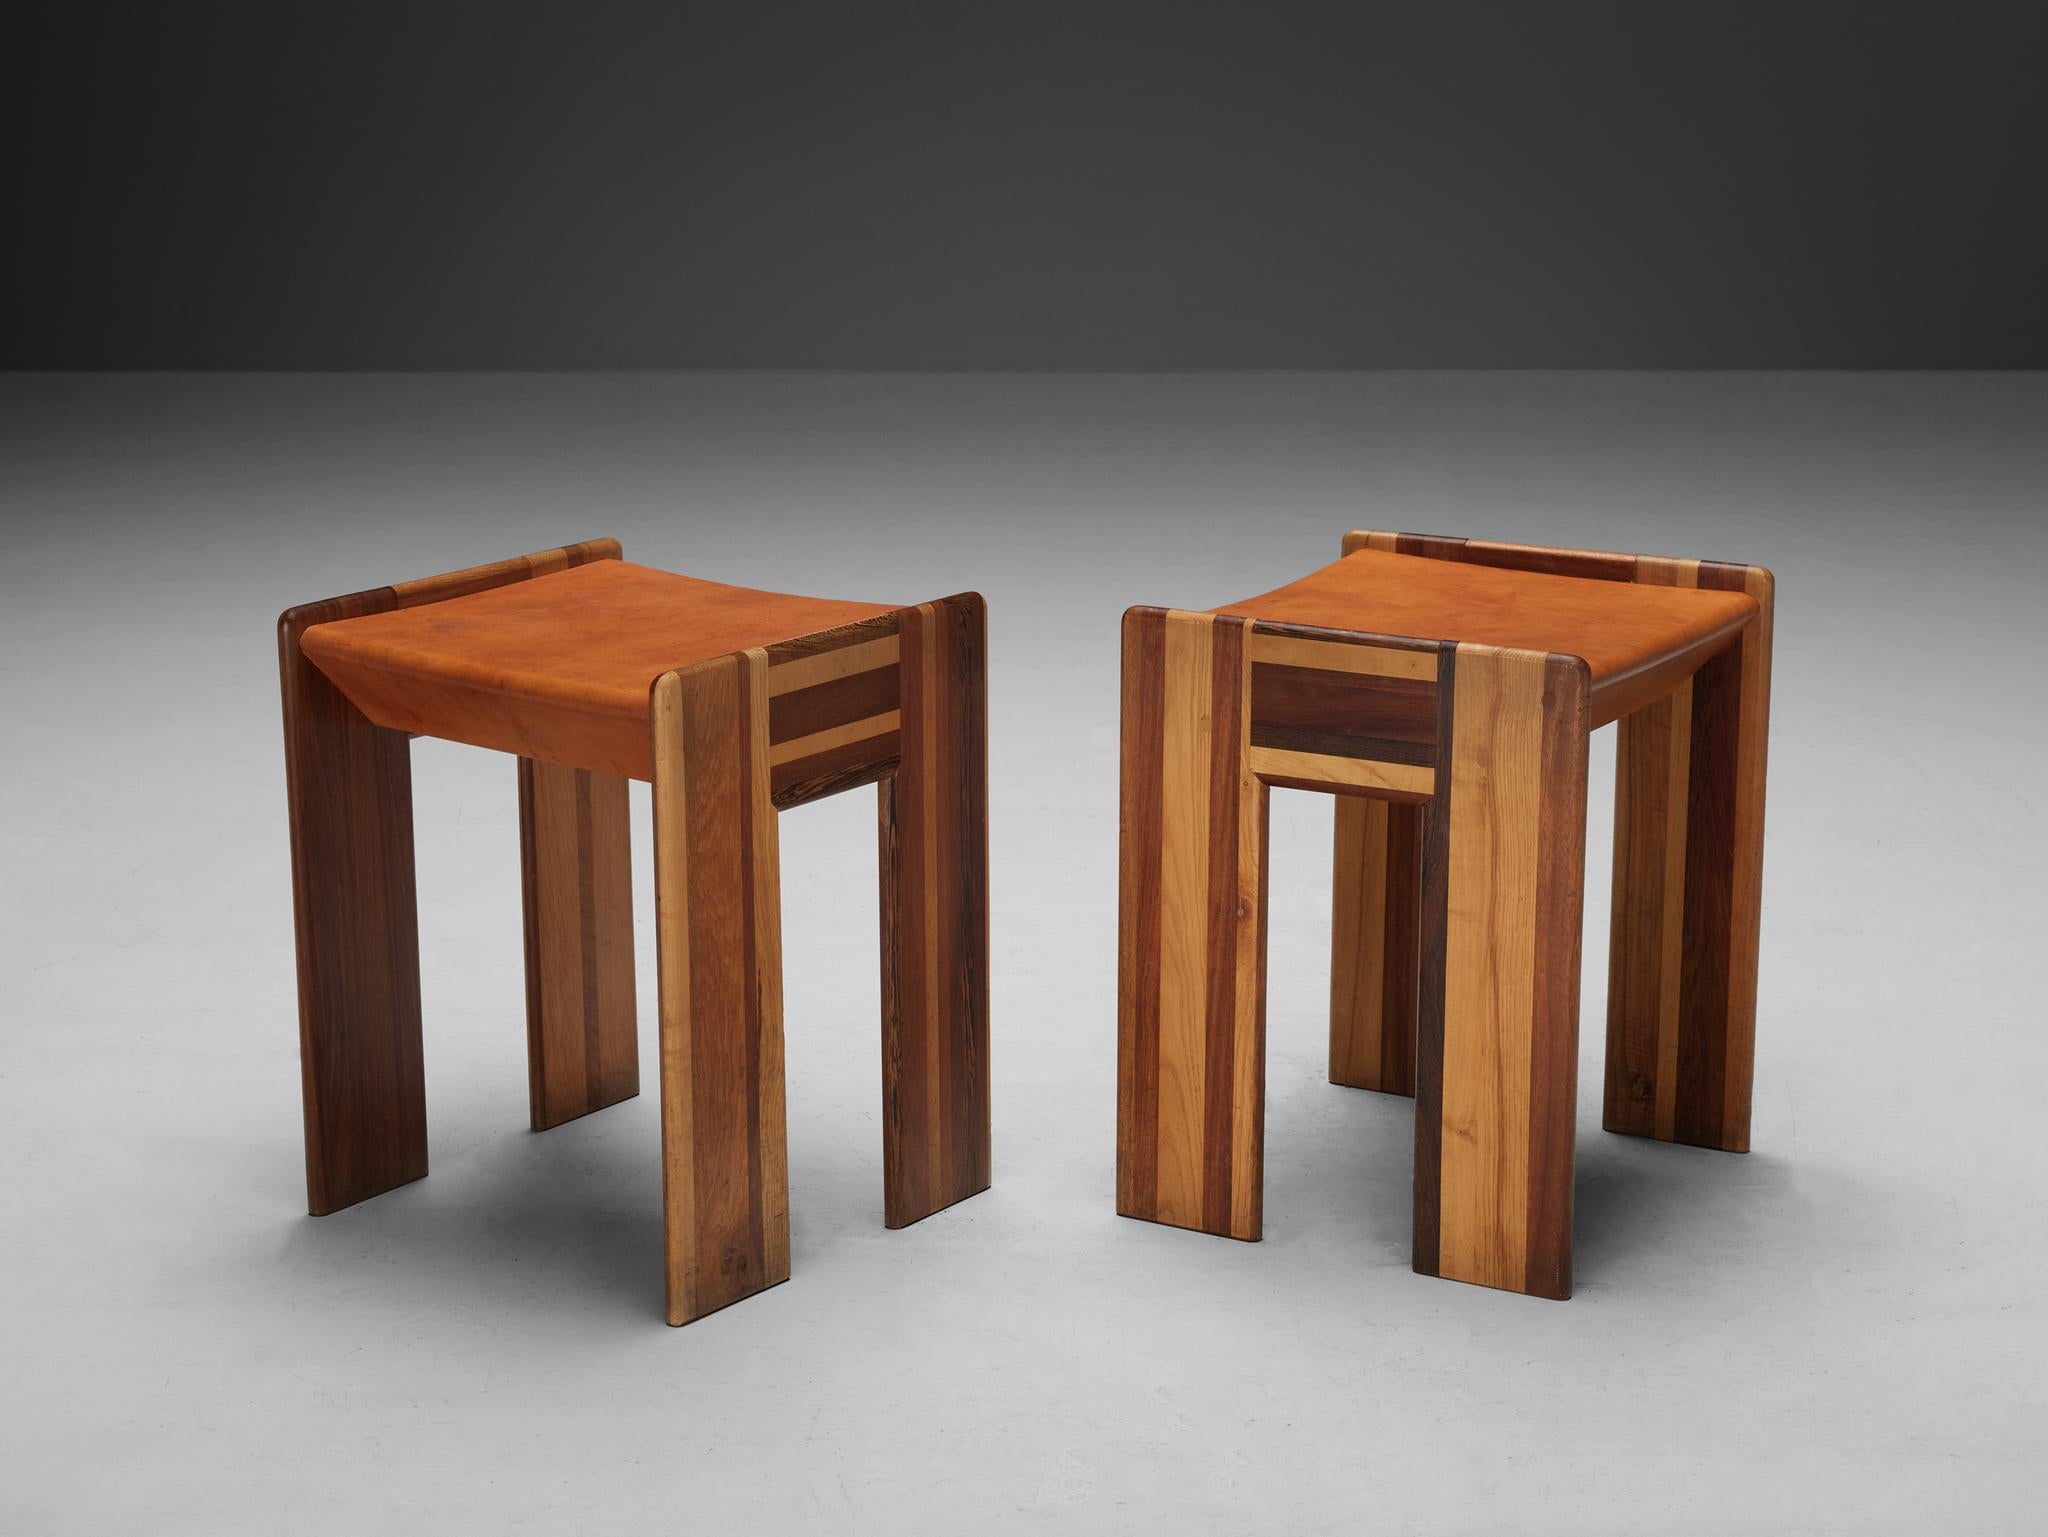 Afra & Tobia Scarpa for Benetton, stools, oak, walnut, wenge, ash, Italy, 1970s

We present exquisitely crafted stools designed by Afra and Tobia Scarpa for the Benetton shop. These chairs embody excellence in every aspect—from form and material